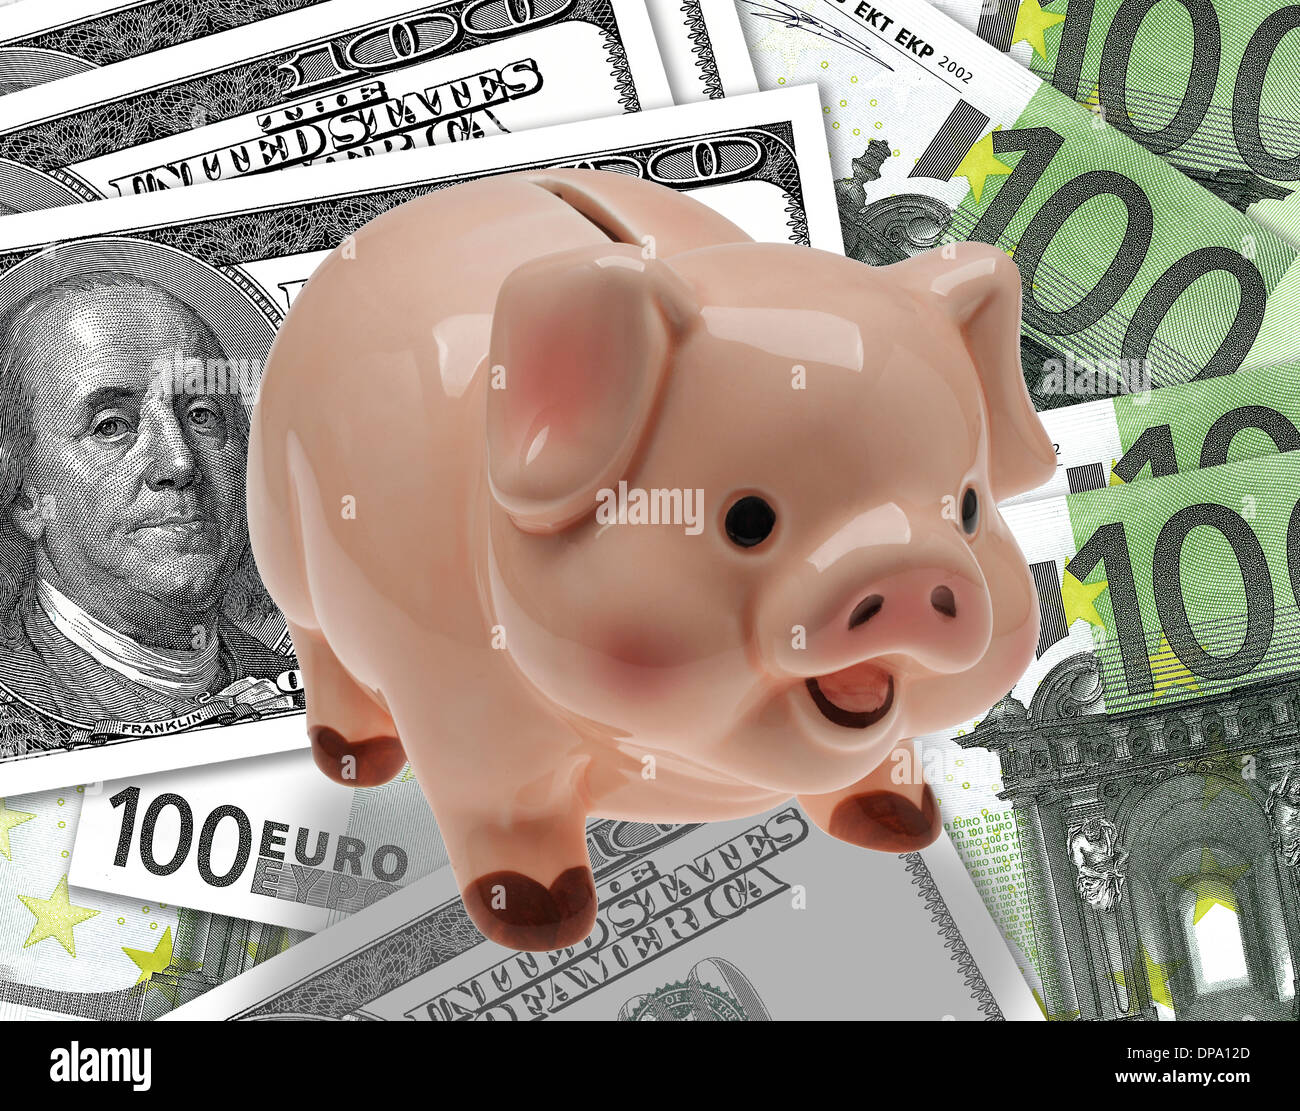 China/ceramic child’s savings or piggy bank on background of euro and dollar currency. Stock Photo